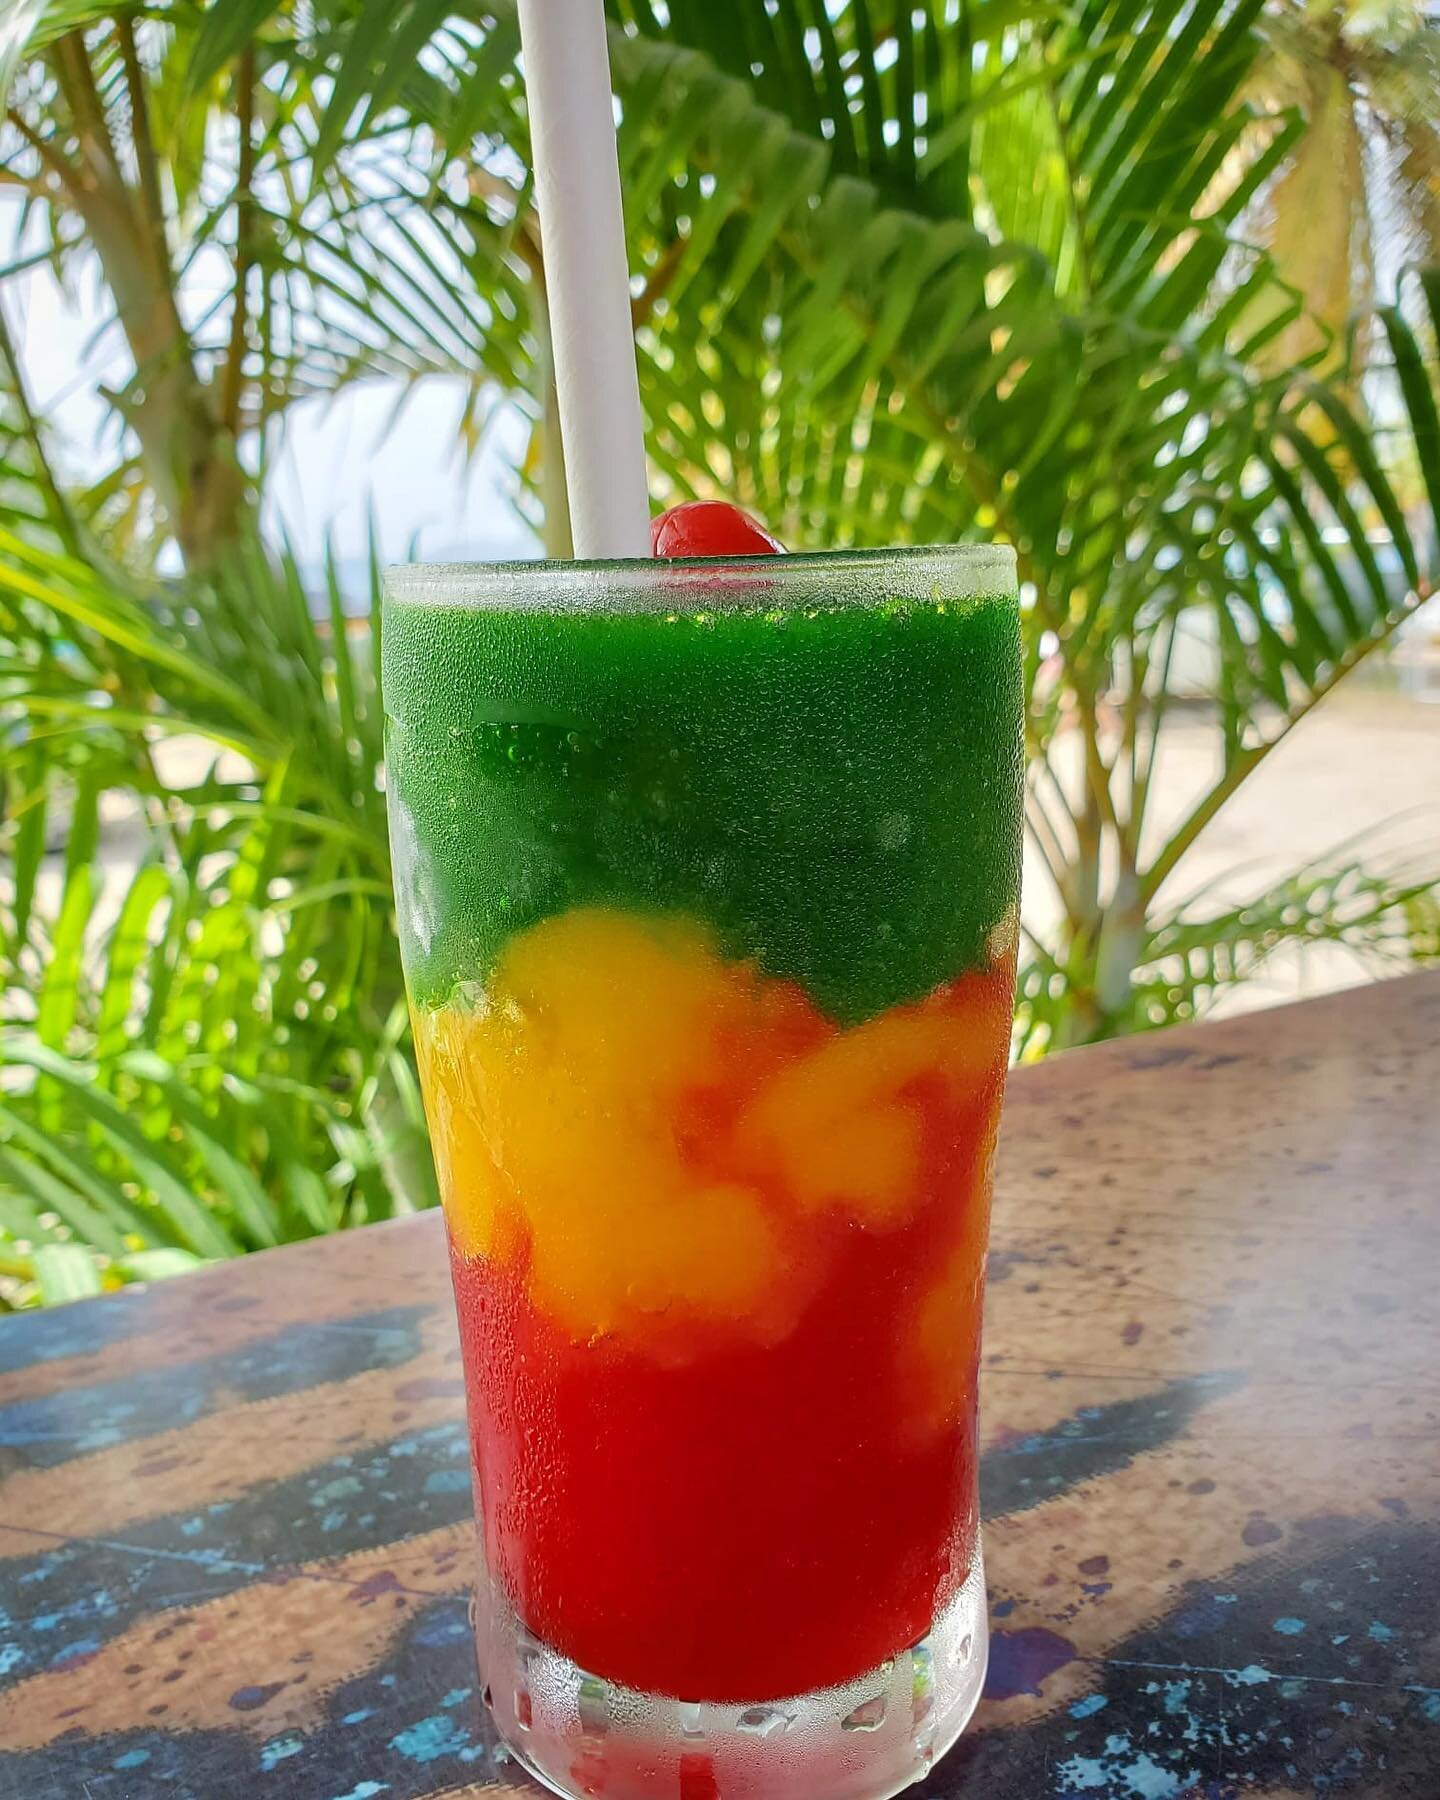 Our most prideful cocktail 🍹🇬🇩
.
That&rsquo;s also beautiful and delicious 😋
.
Come #EatDrinkLime with us, and give one a try!
.
#umbrellasbeachbar #beachbar #beach #bar #cocktail #cocktails #grenada #grenadian #beachside #grandansebeach #redgree